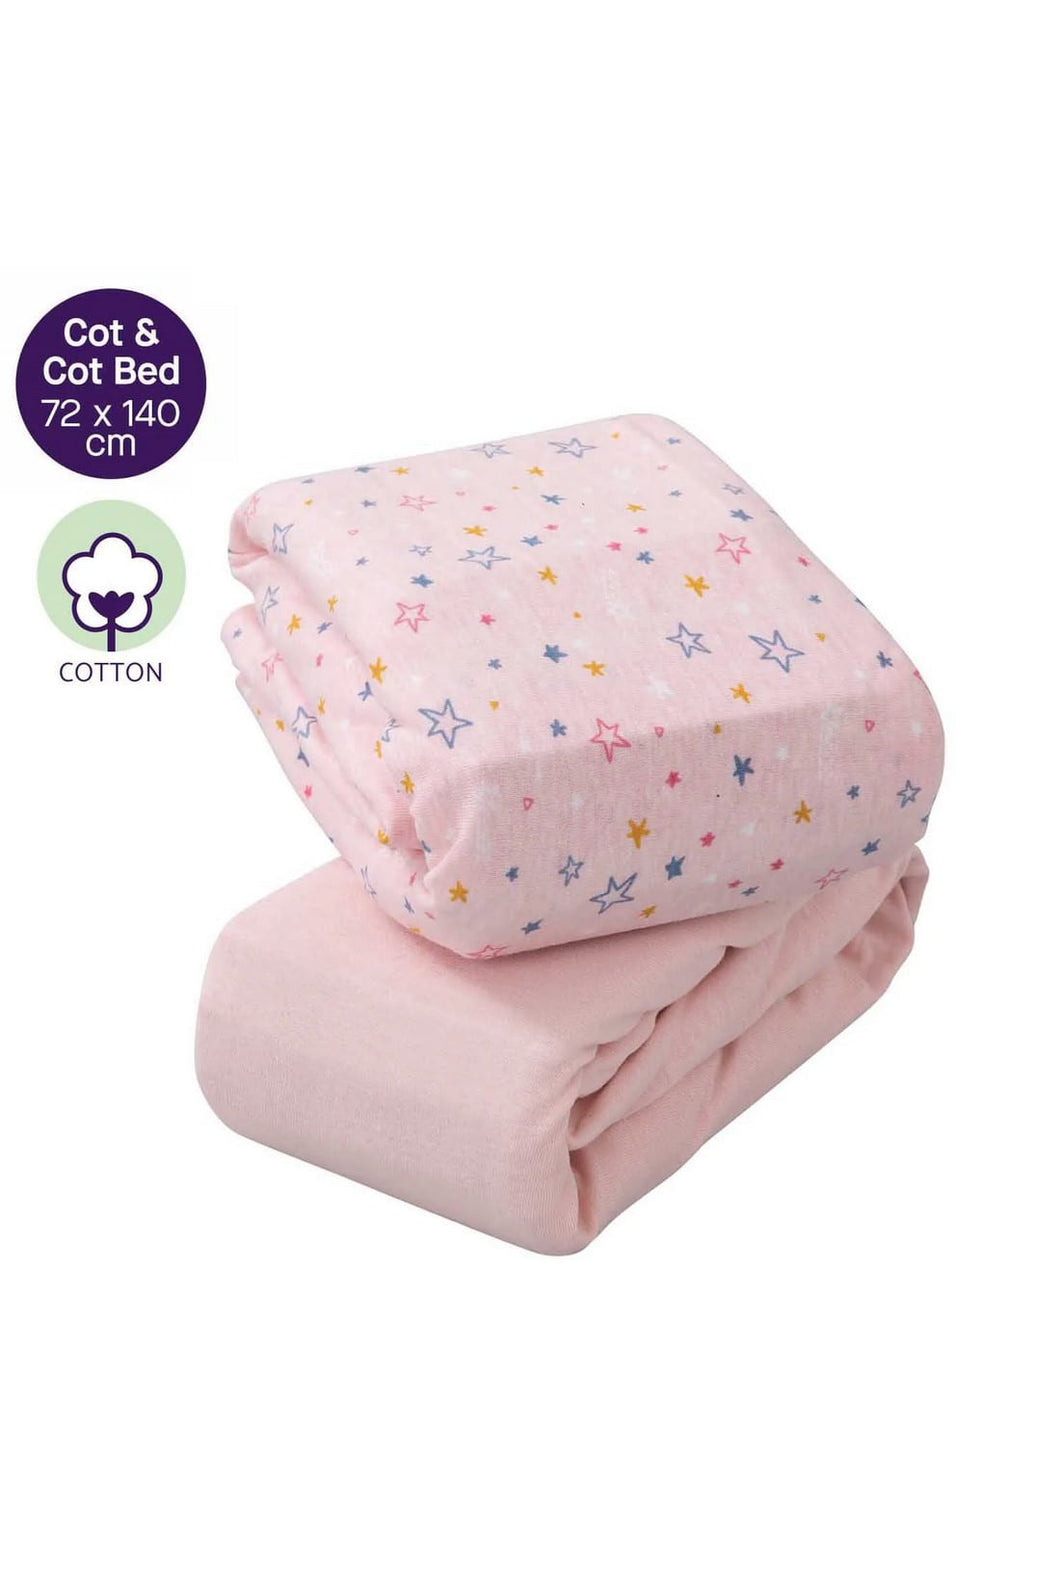 Cleavamama Jersey Cotton Fitted Sheets One Size for Cot & Cot Bed 72 x 140 x 17 cm Pink  1